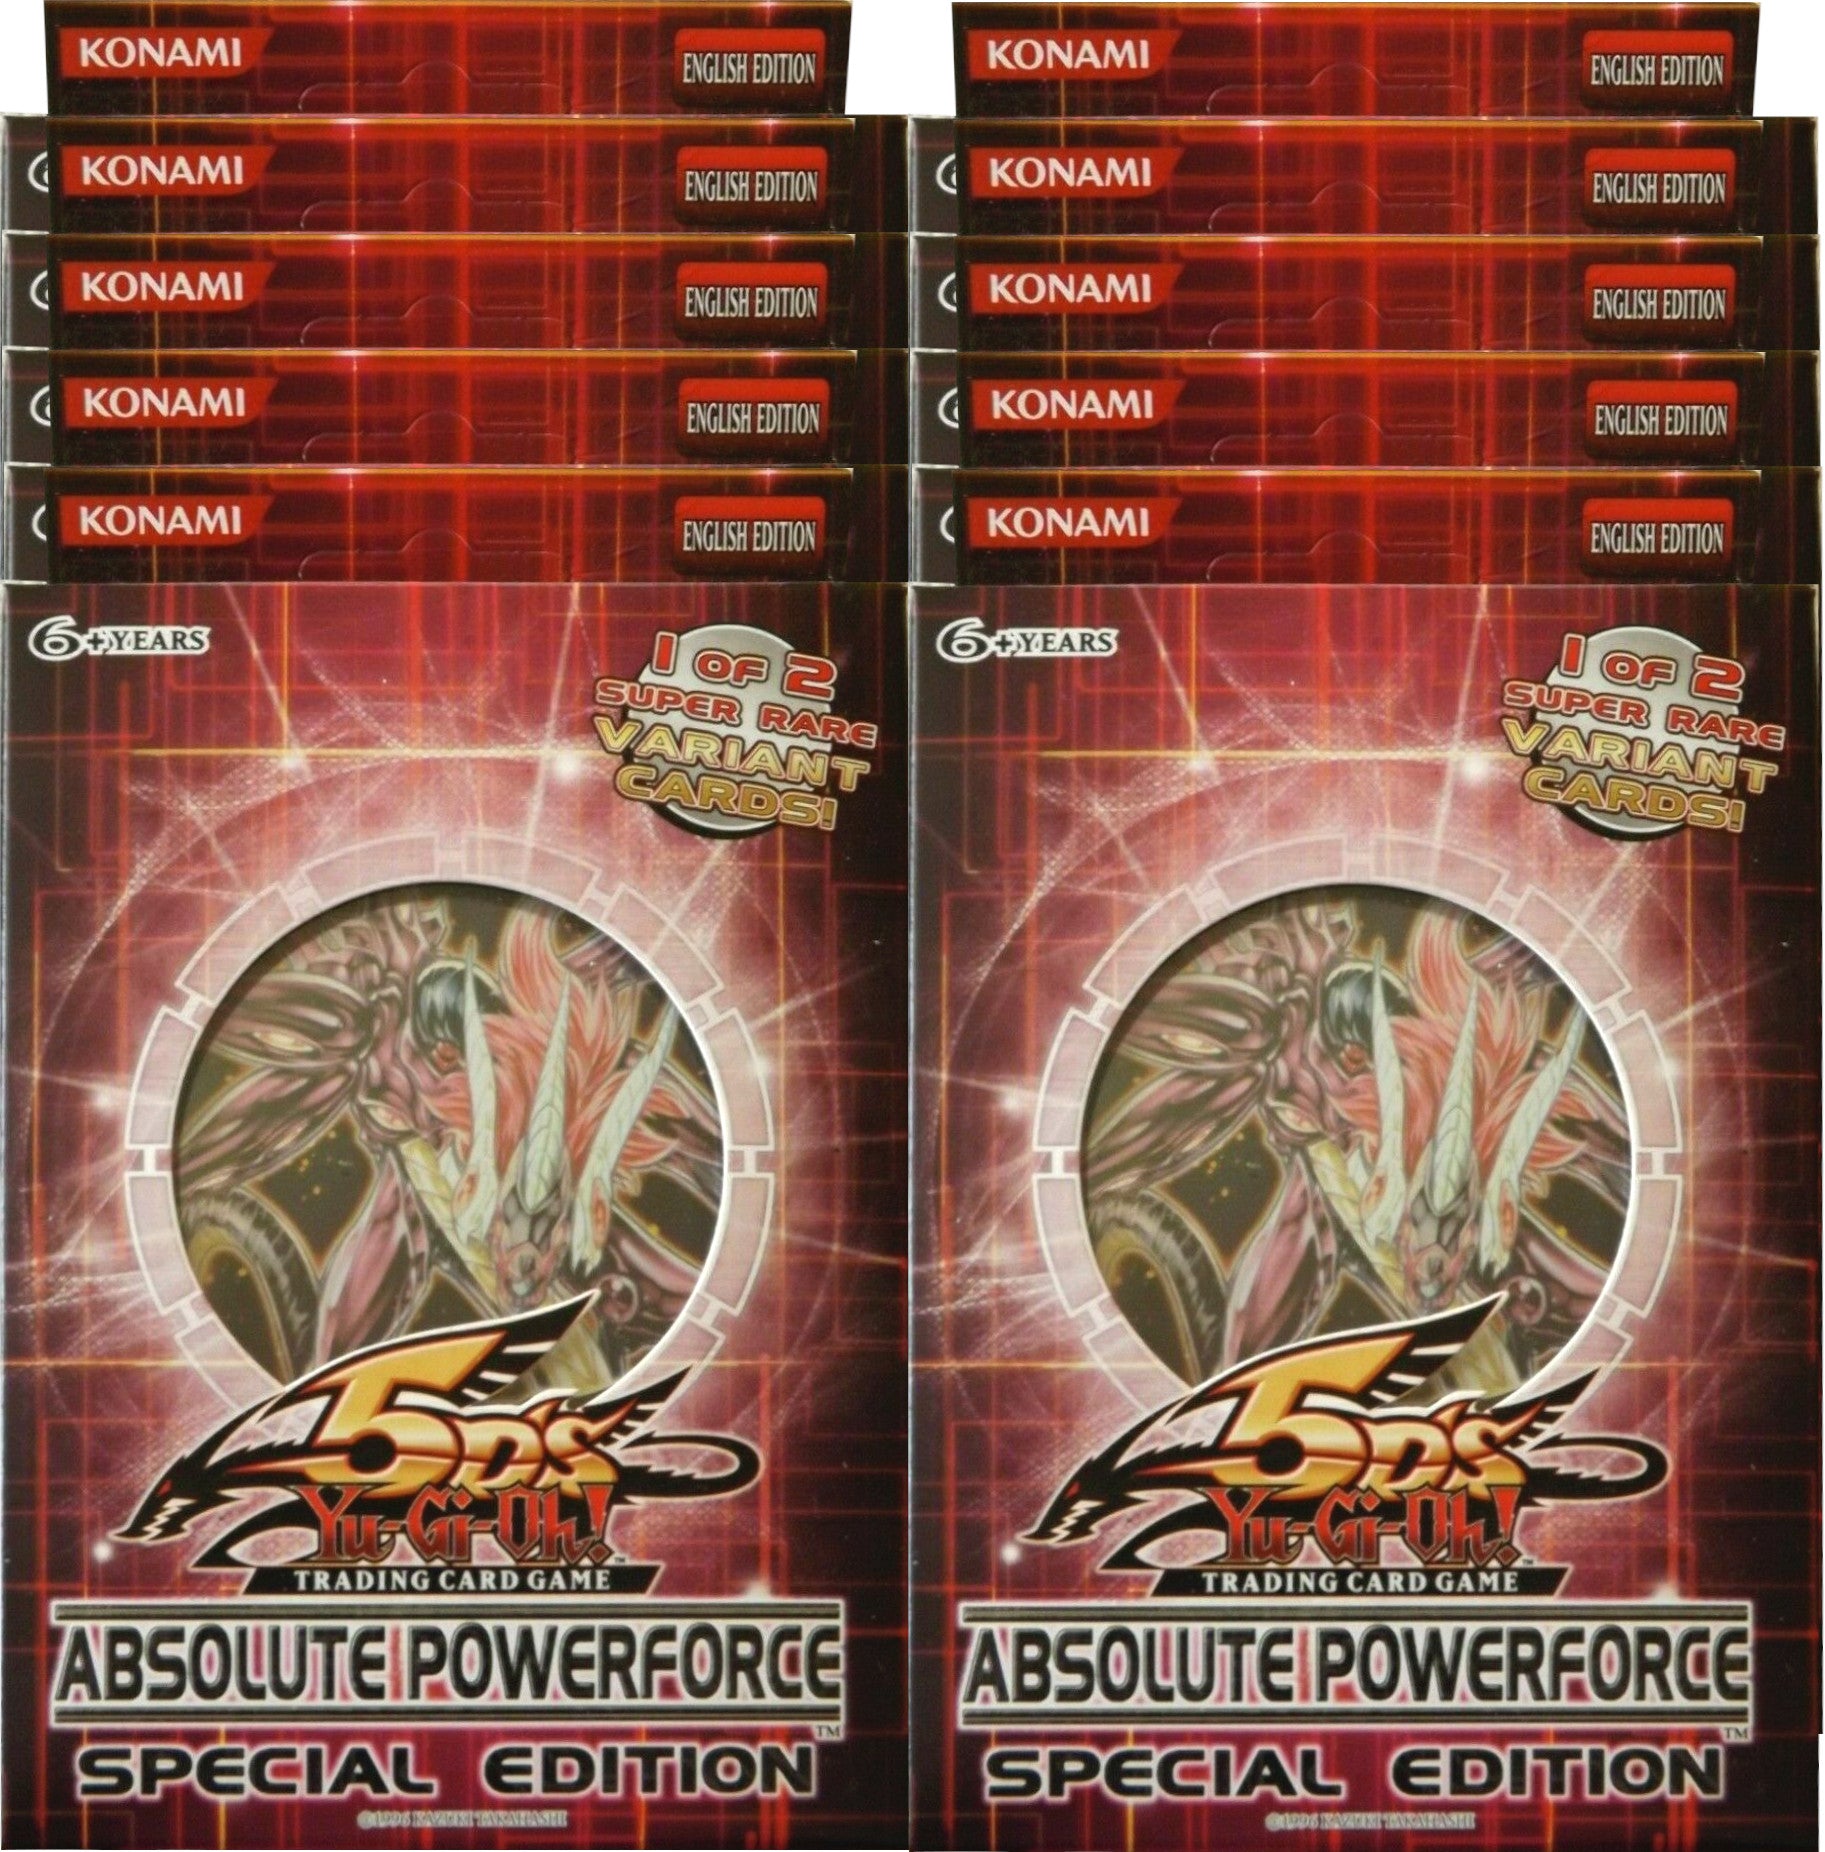 Absolute Powerforce - Special Edition Display | Total Play